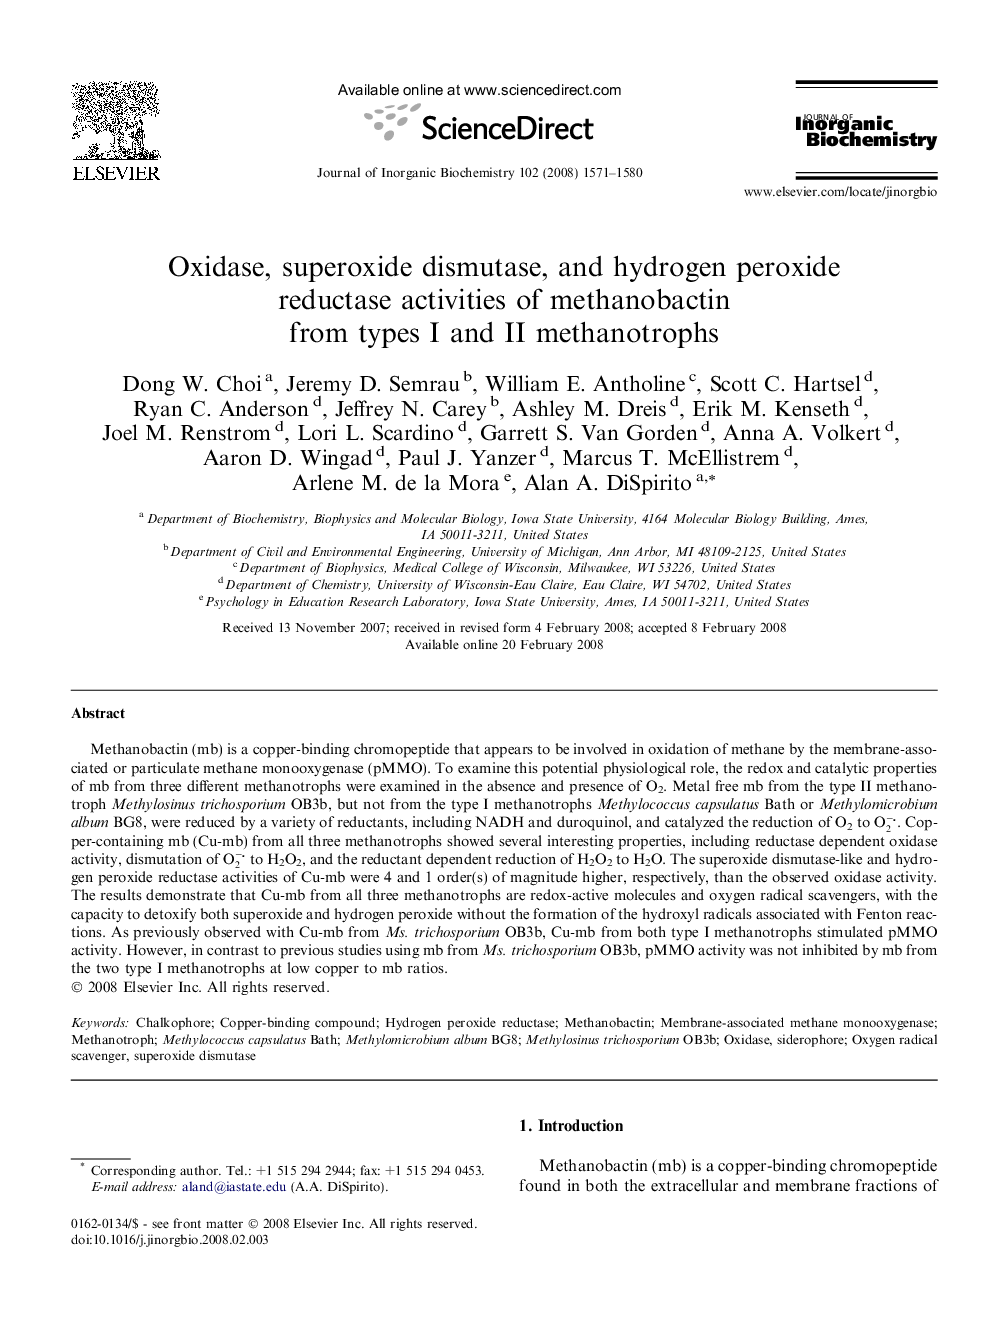 Oxidase, superoxide dismutase, and hydrogen peroxide reductase activities of methanobactin from types I and II methanotrophs